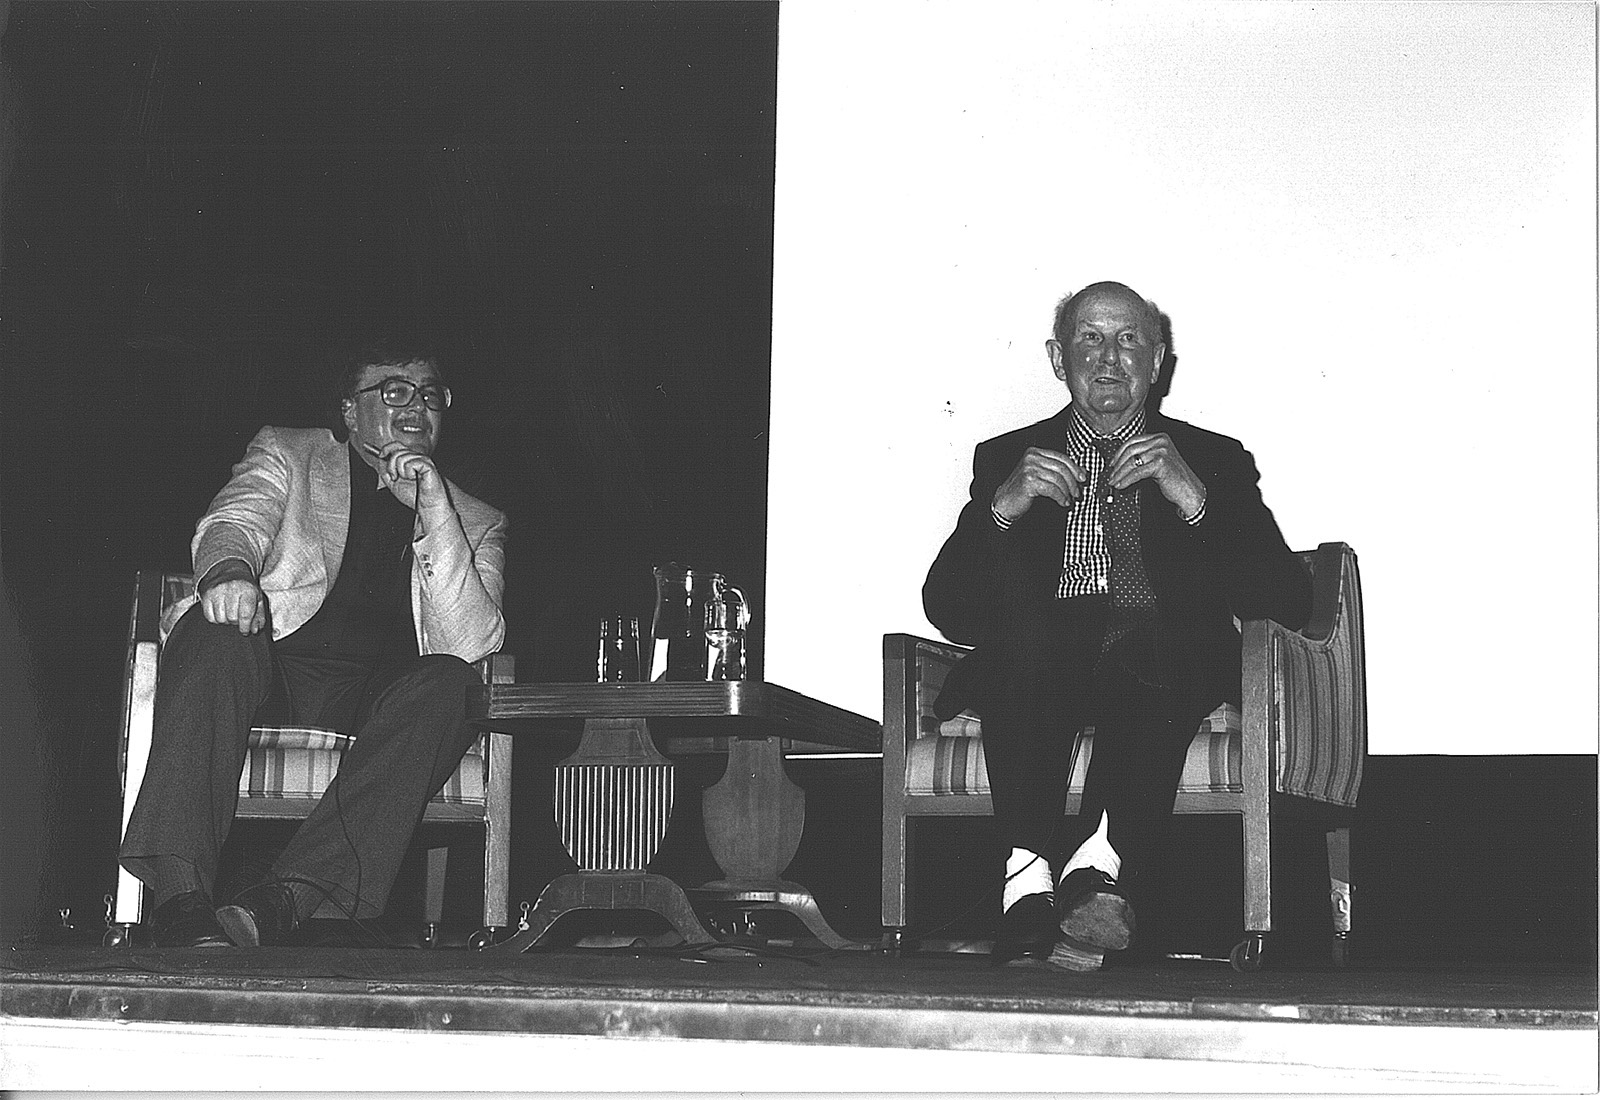 Director and screenwriter, Michael Powell on stage at the May 20 screening of his film, A Matter of Life and Death